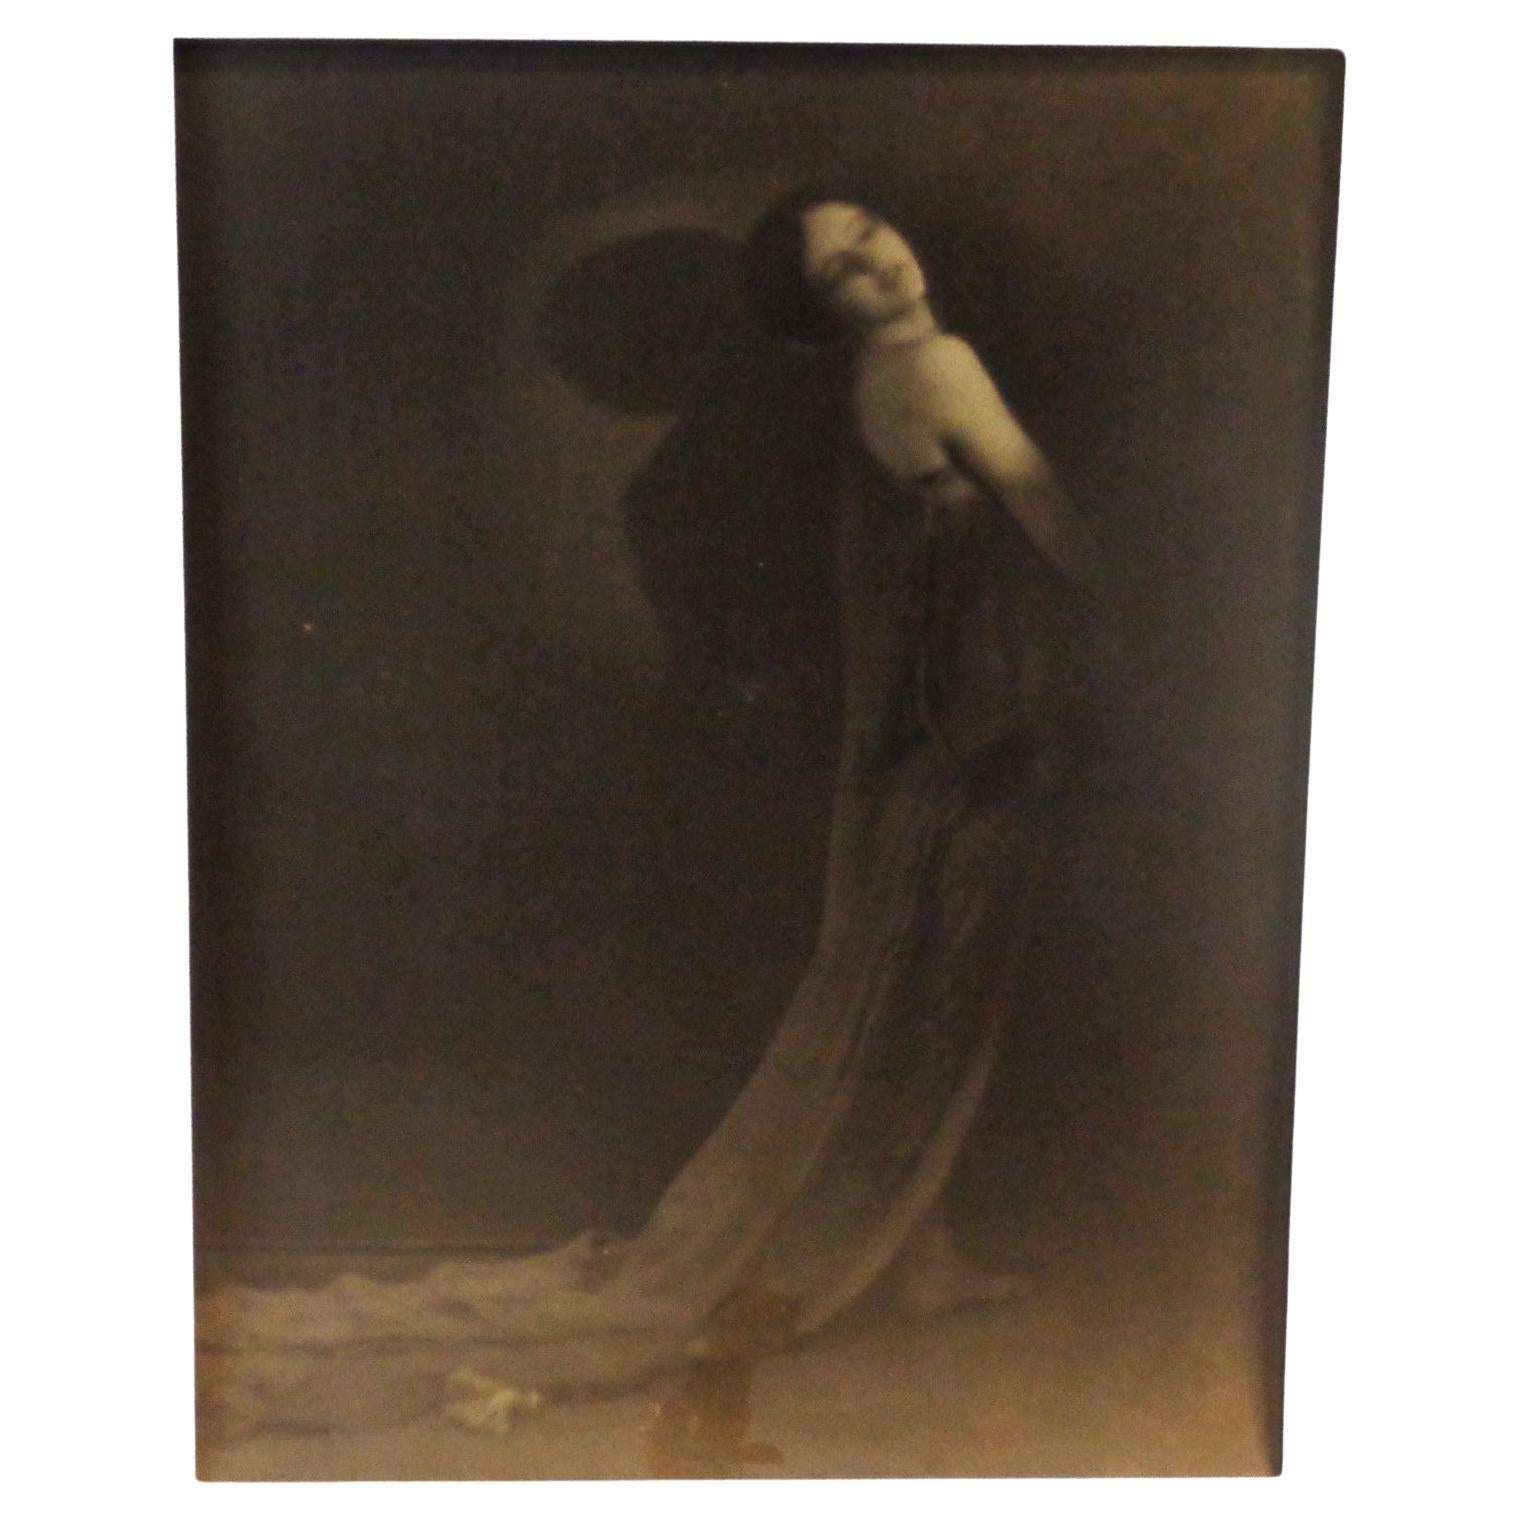 American Early Pictorialist Sepia Tone Gelatin Silver Print Photograph Sultry Woman For Sale